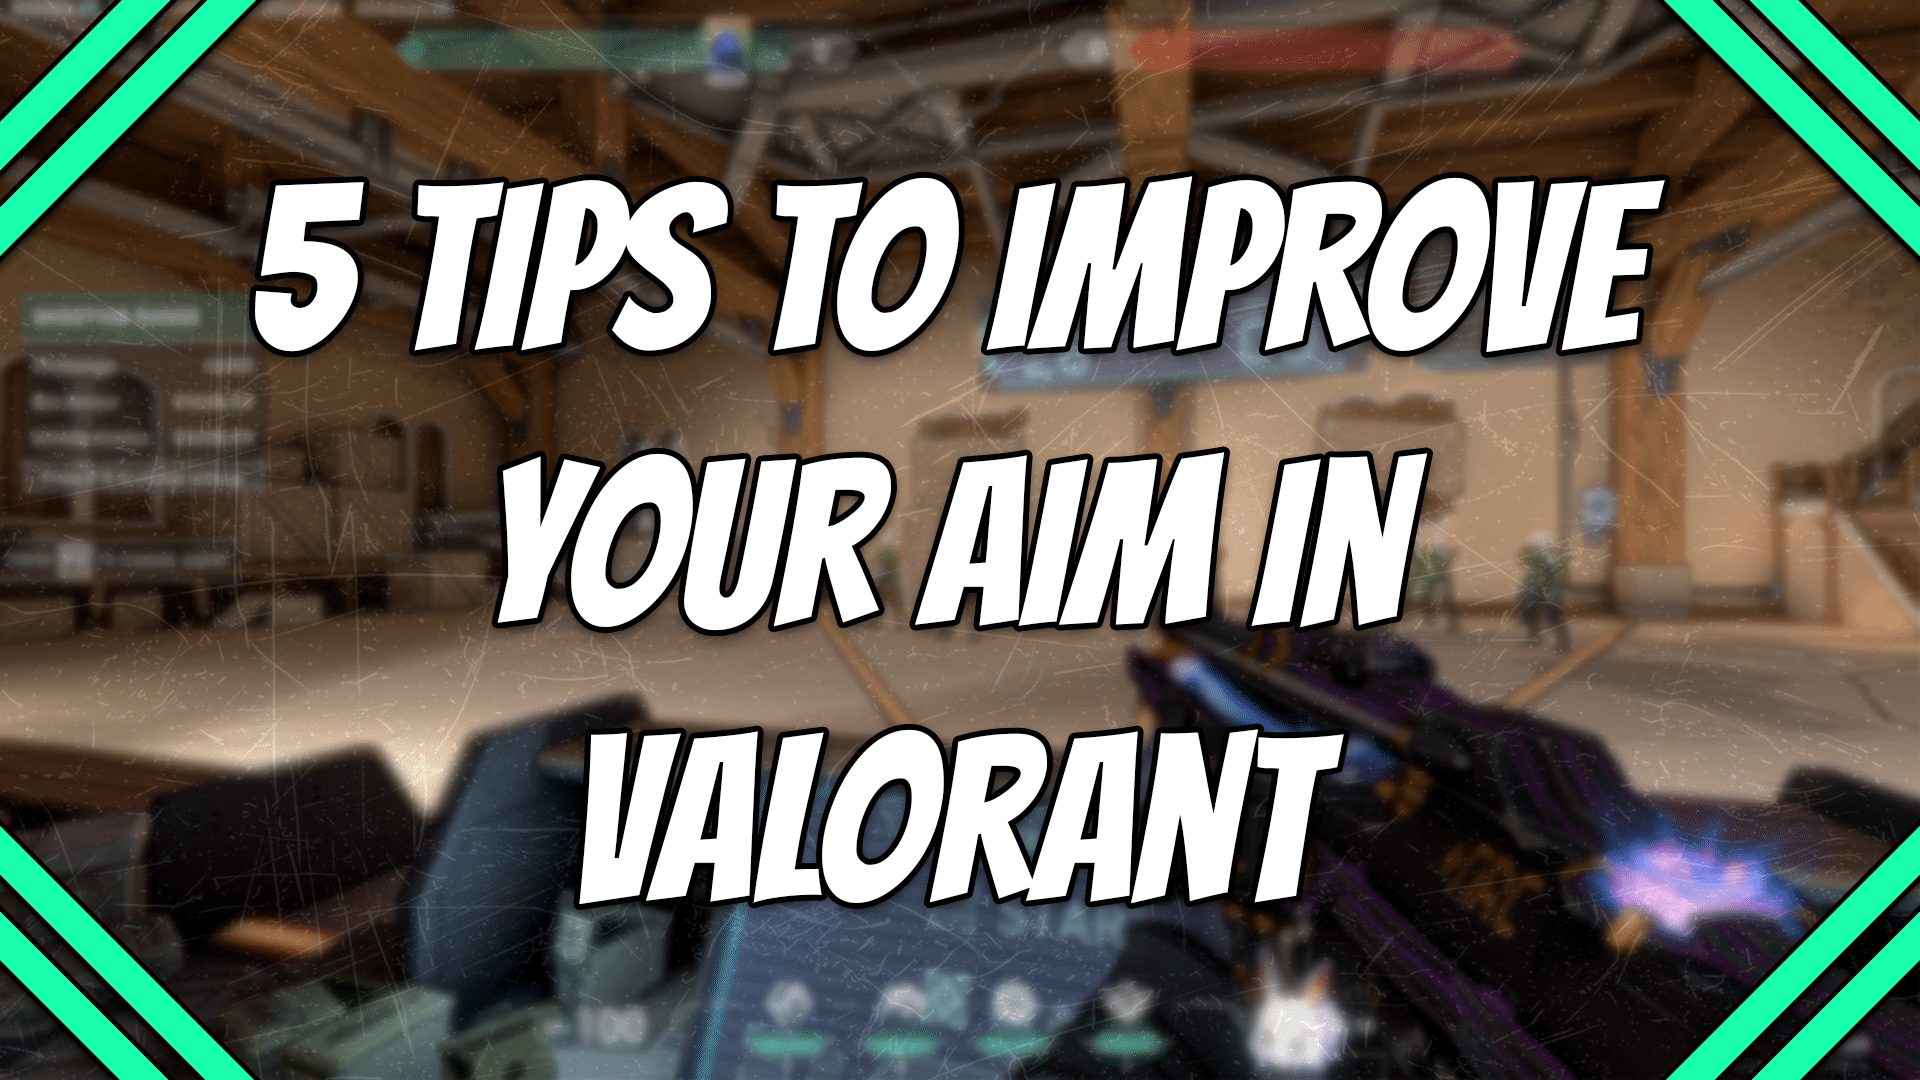 5 tips to improve your aim in Valorant title card